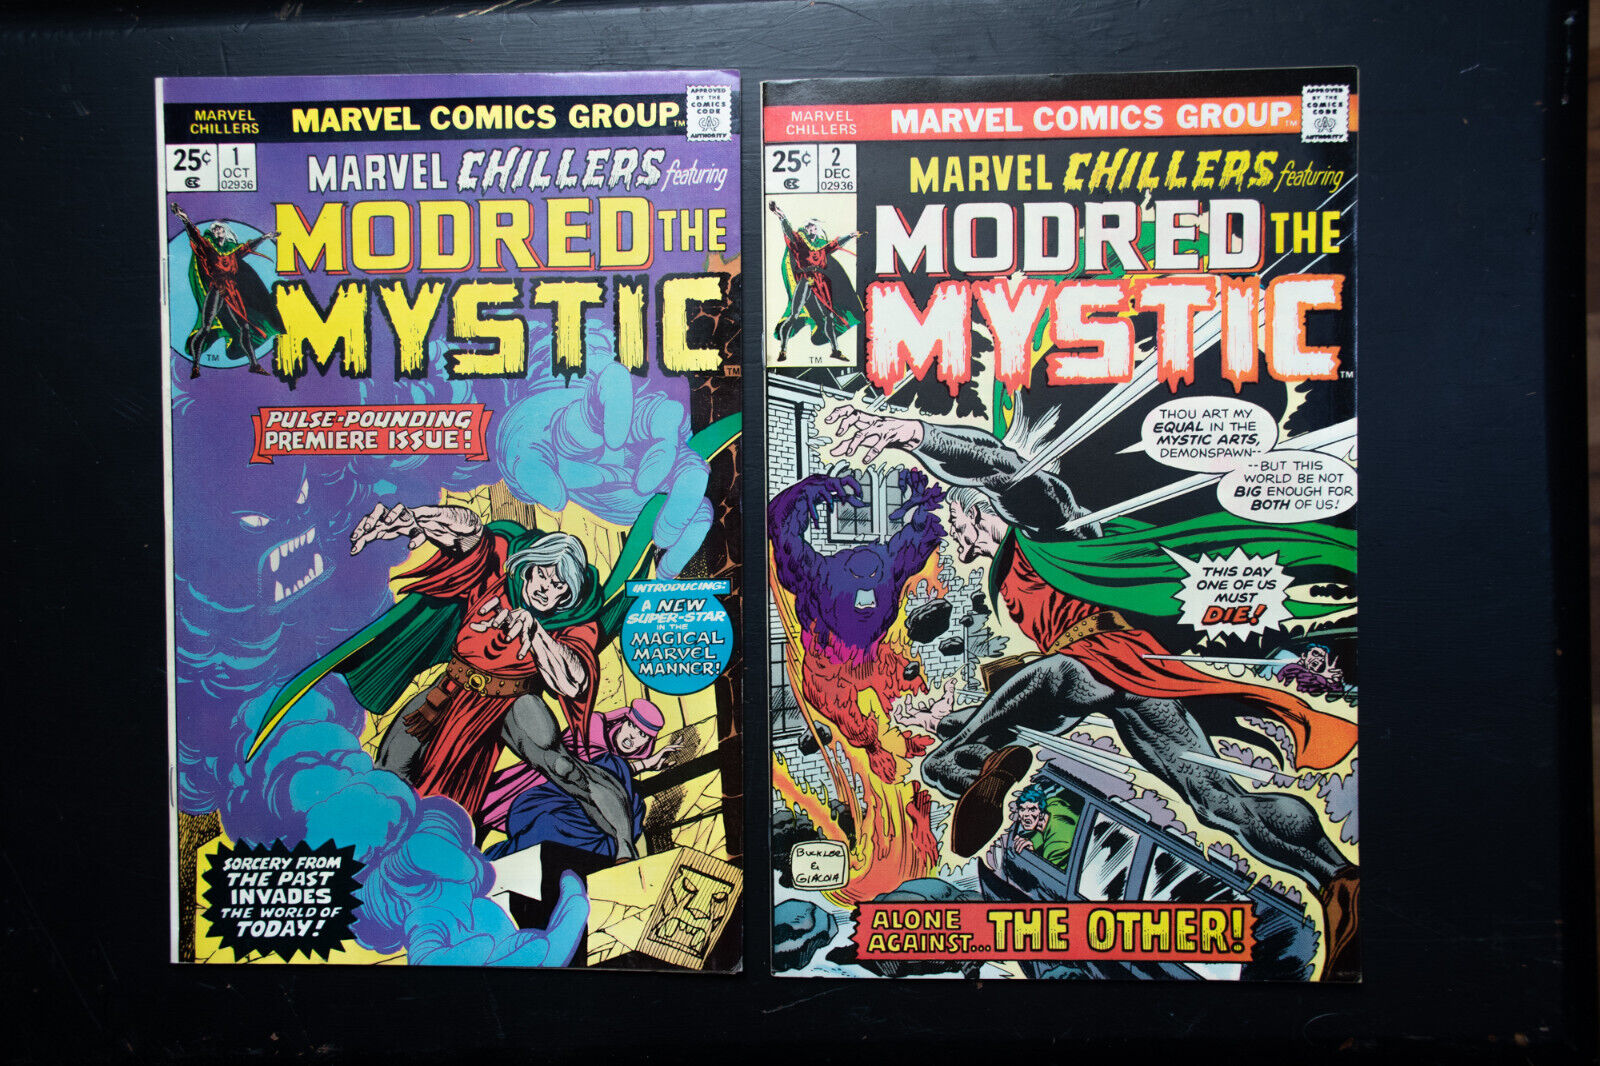 1975 Marvel Comics Marvel Chillers MODRED the MYSTIC Issues 1 & 2